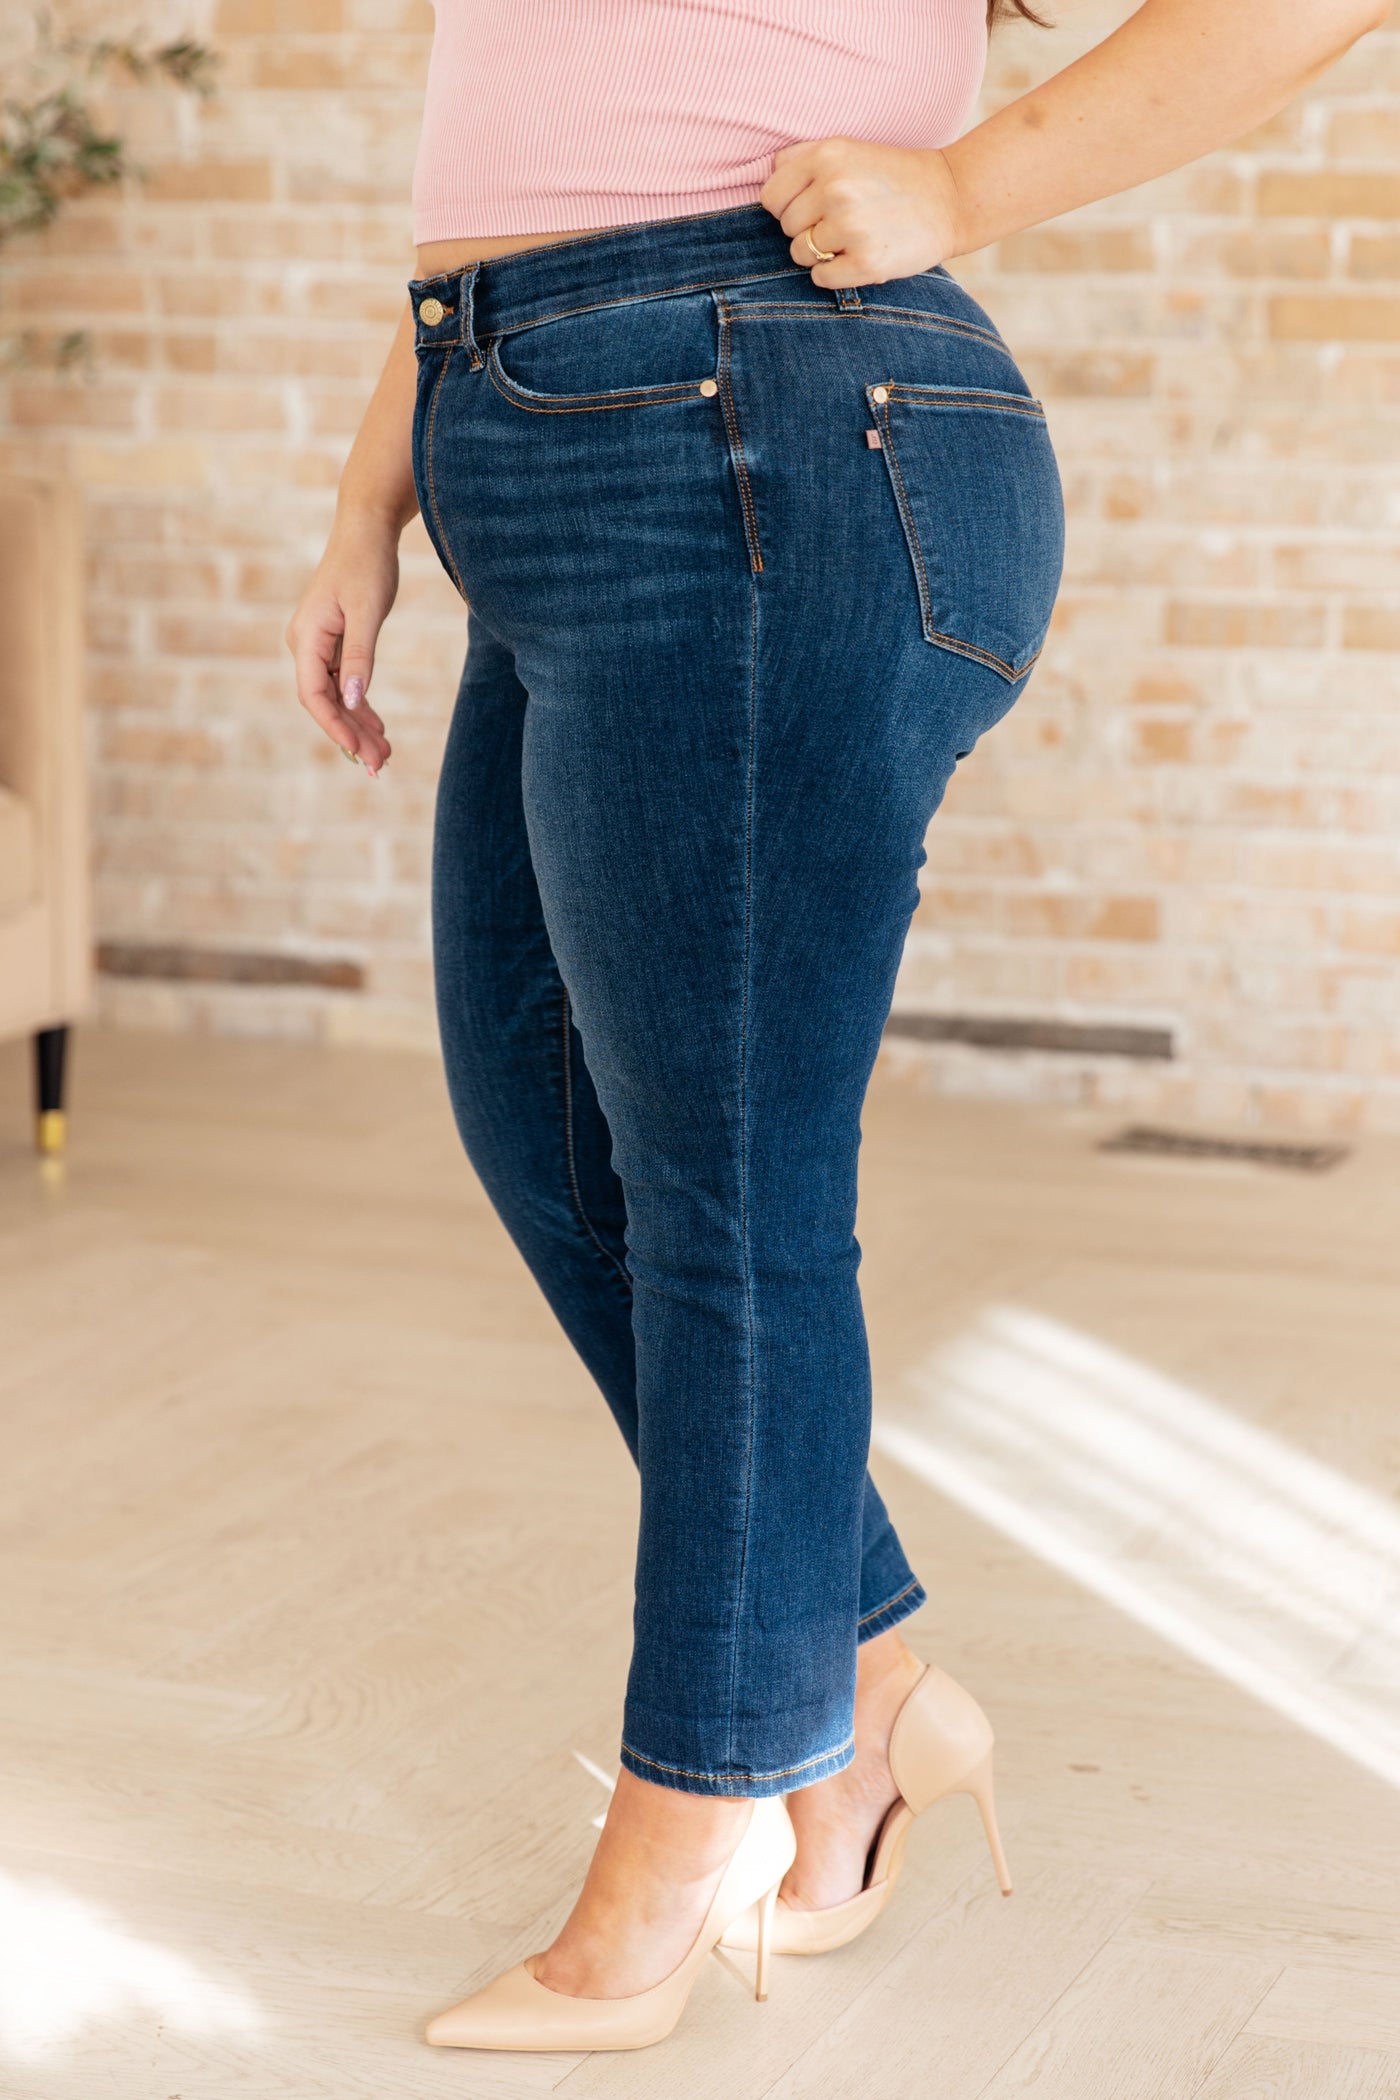 Bette Mid Rise Vintage Cuffed Skinny Capri-Denim-Ave Shops-Market Street Nest, Fashionable Clothing, Shoes and Home Décor Located in Mabank, TX